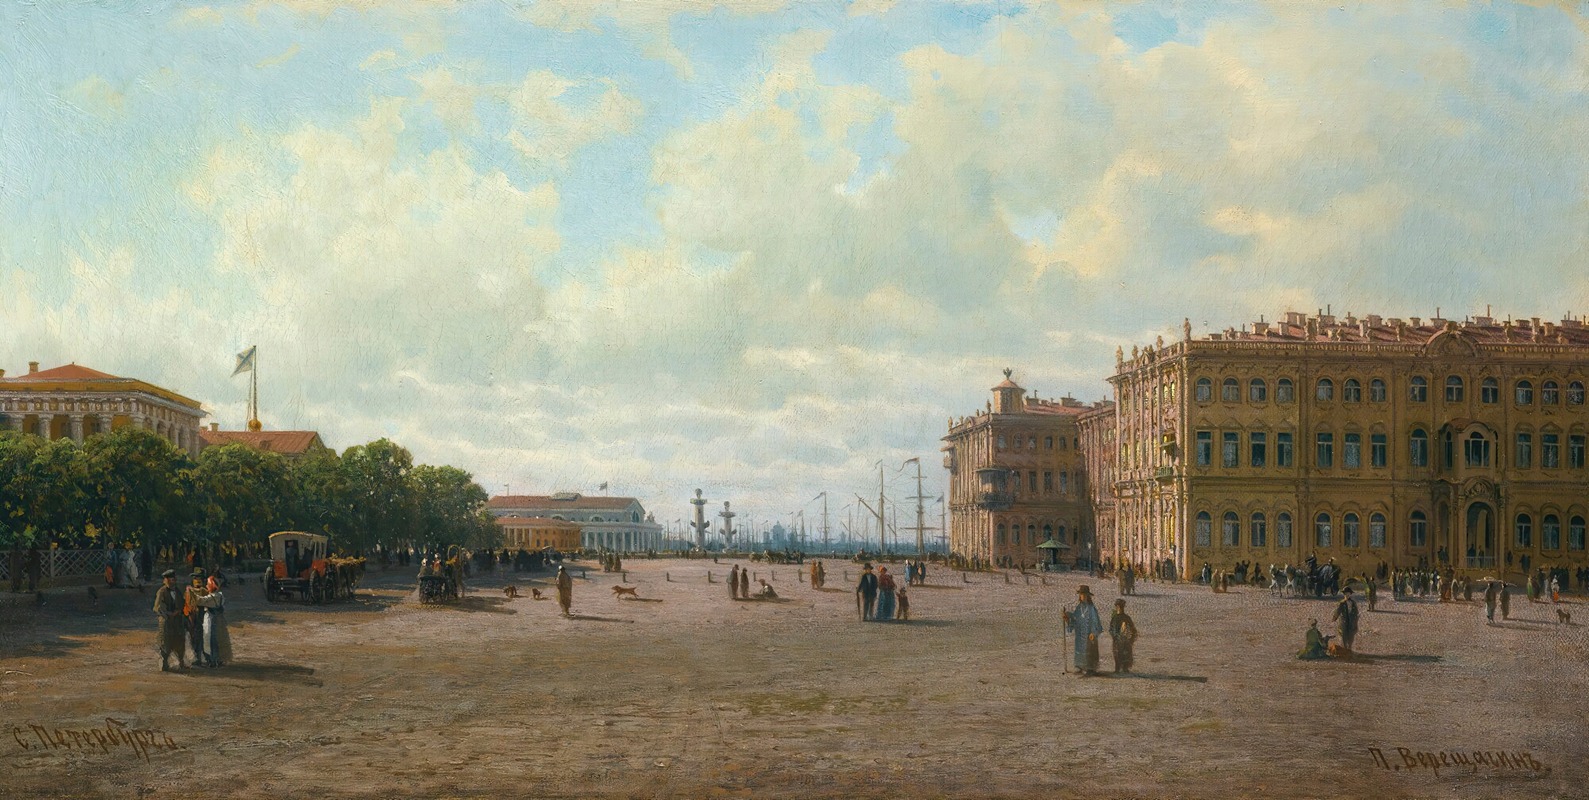 Petr Petrovich Vereshchagin - View Of Palace Square, St Petersburg